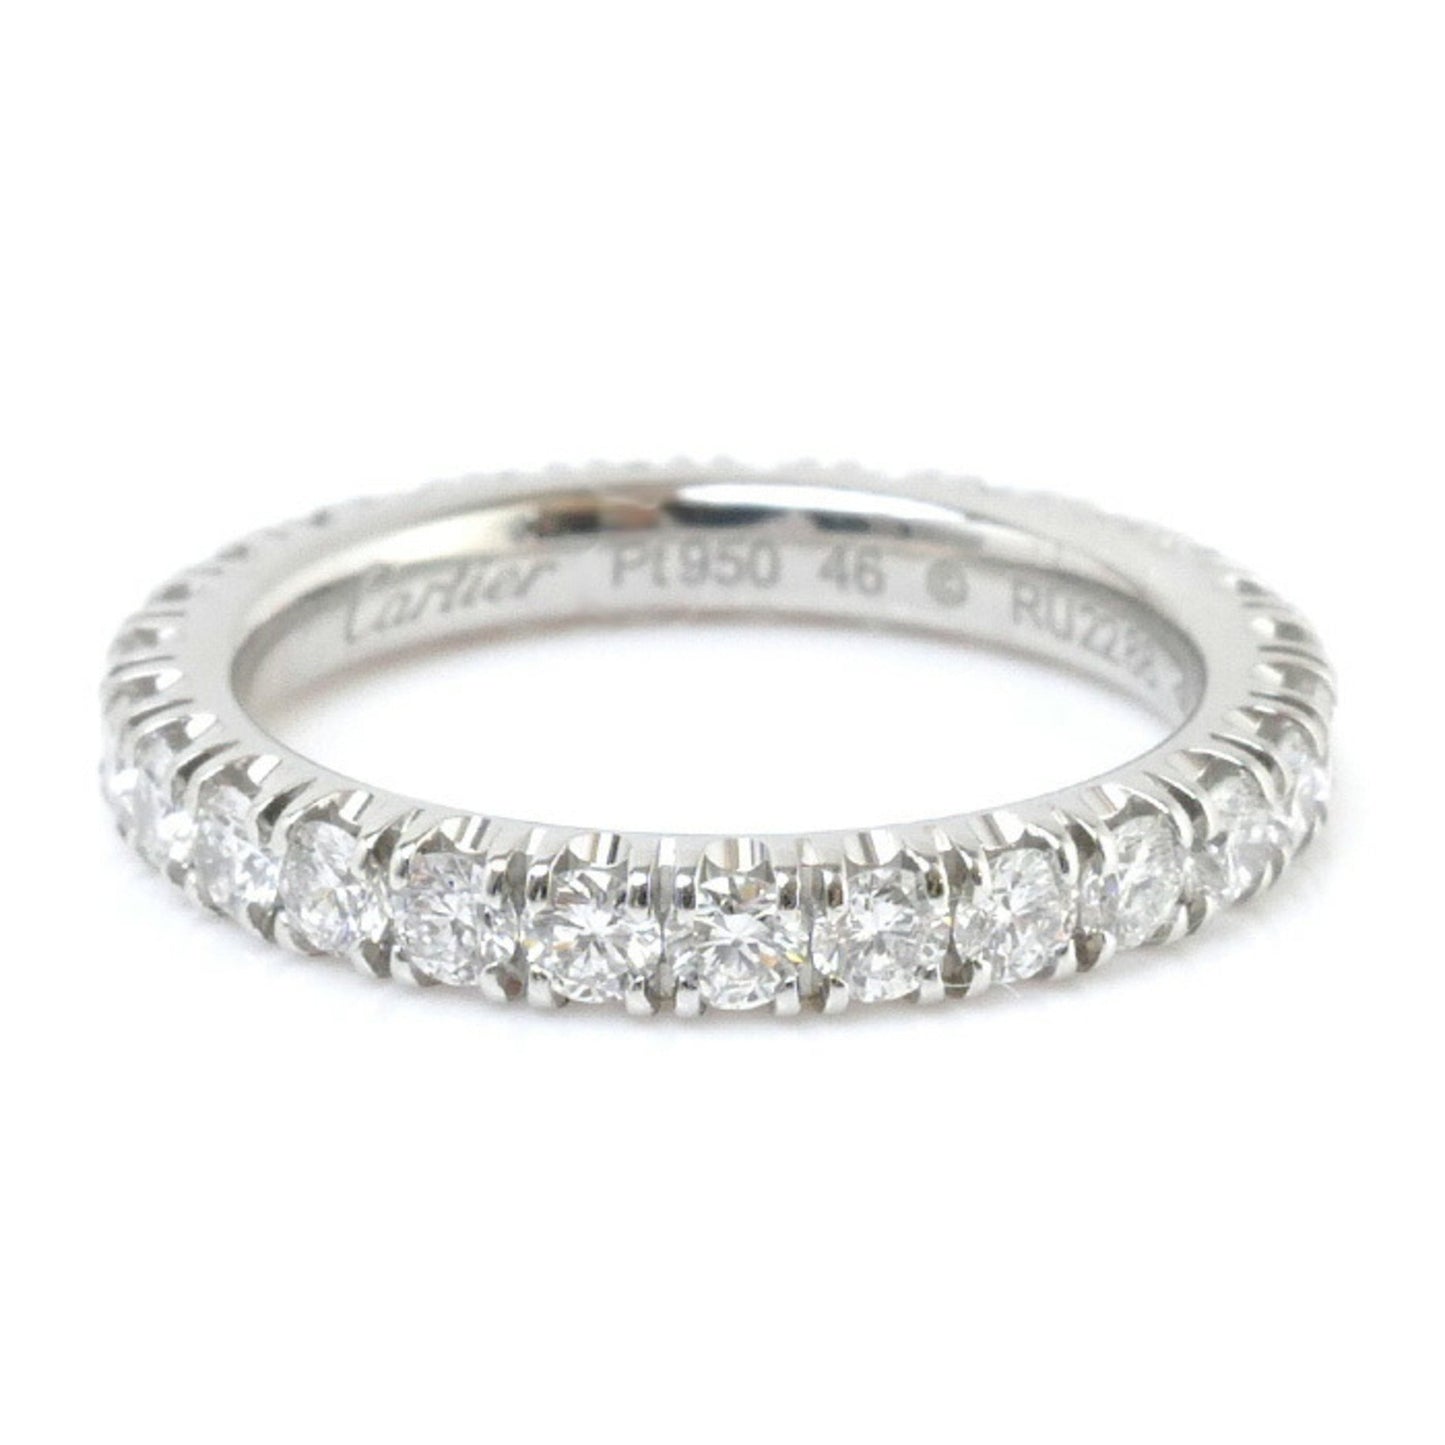 Cartier Women's Platinum Diamond Band Ring in Silver